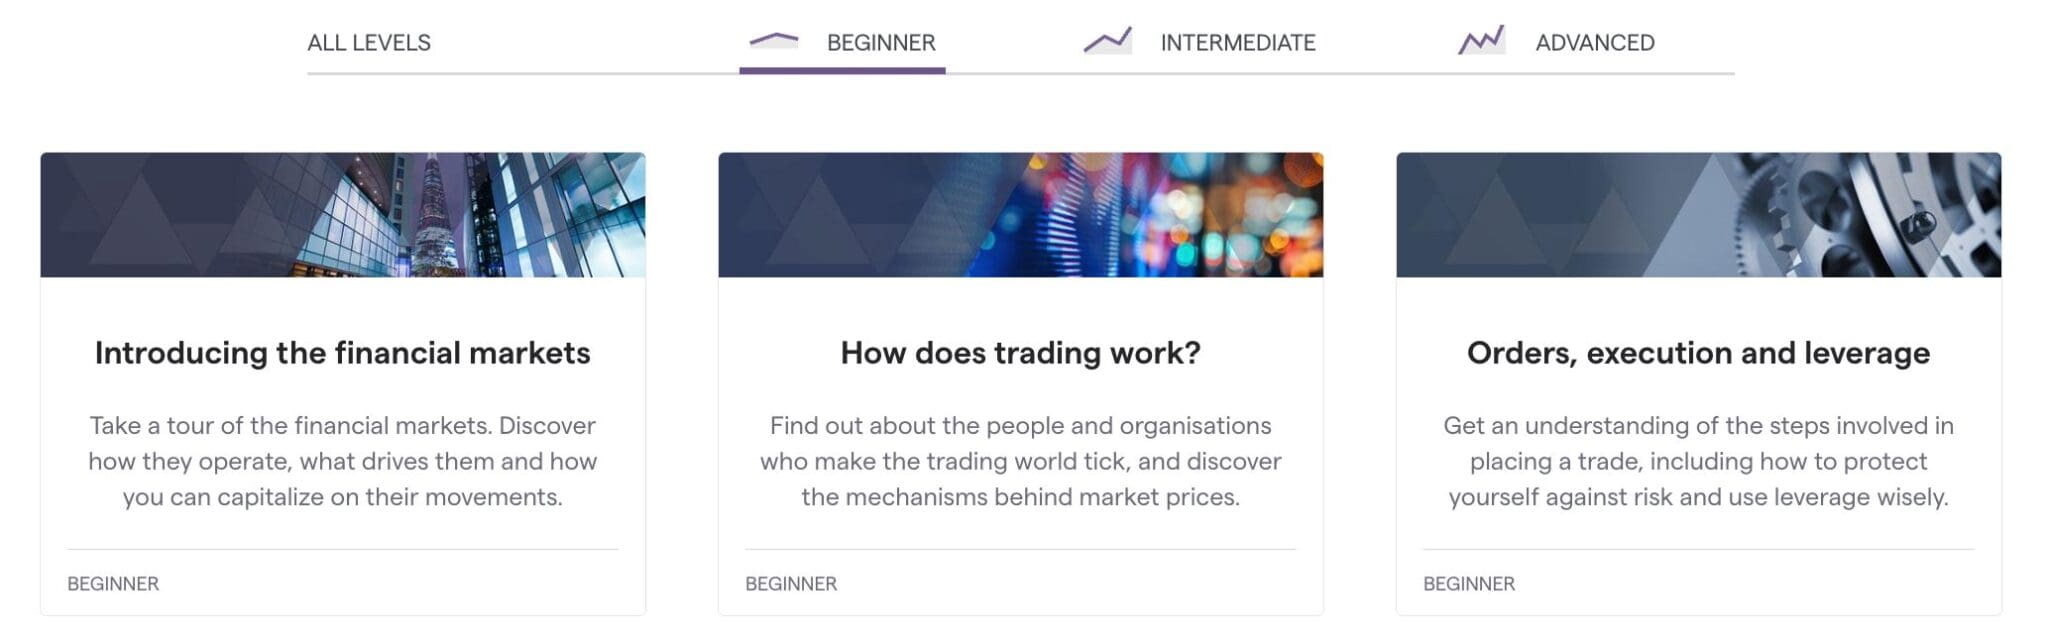 Beginner day trading education at IG Academy